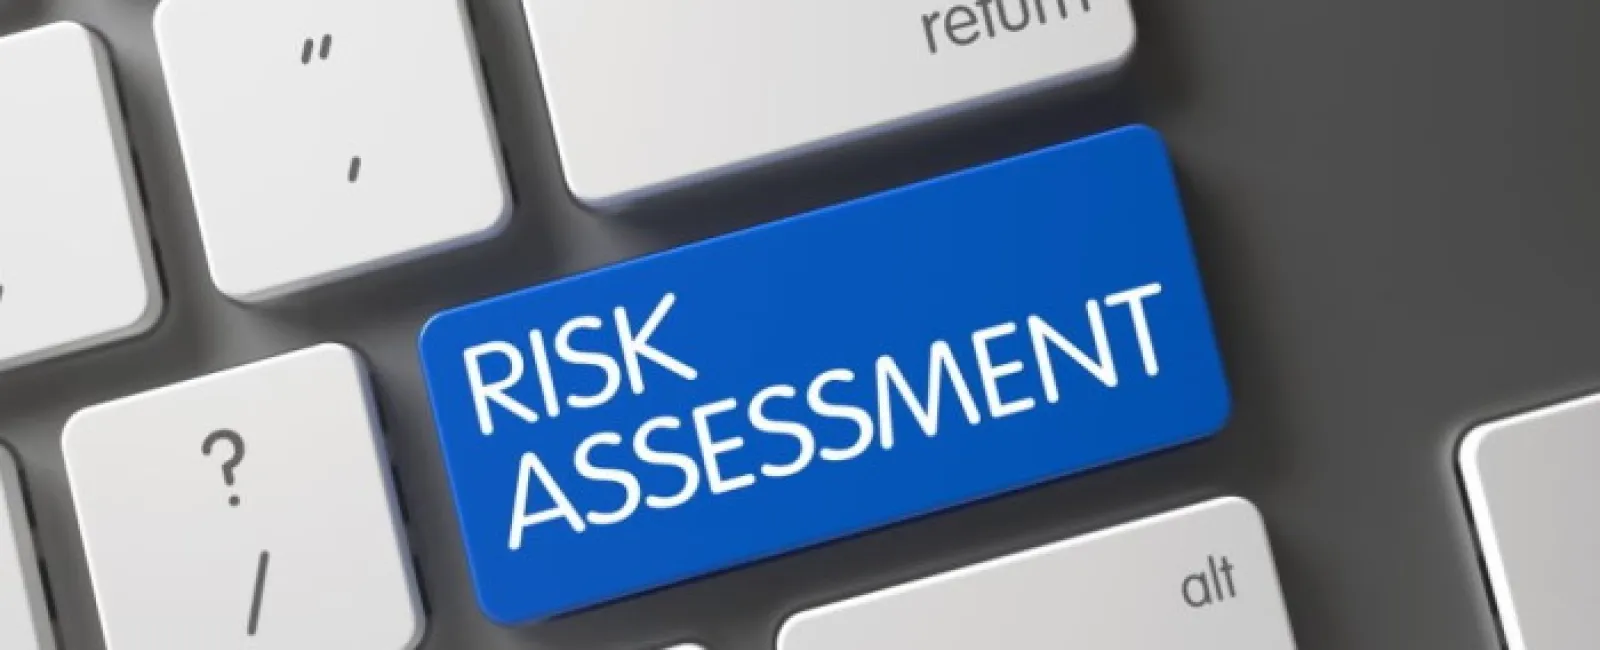 adoption of comprehensive risk assessment approaches